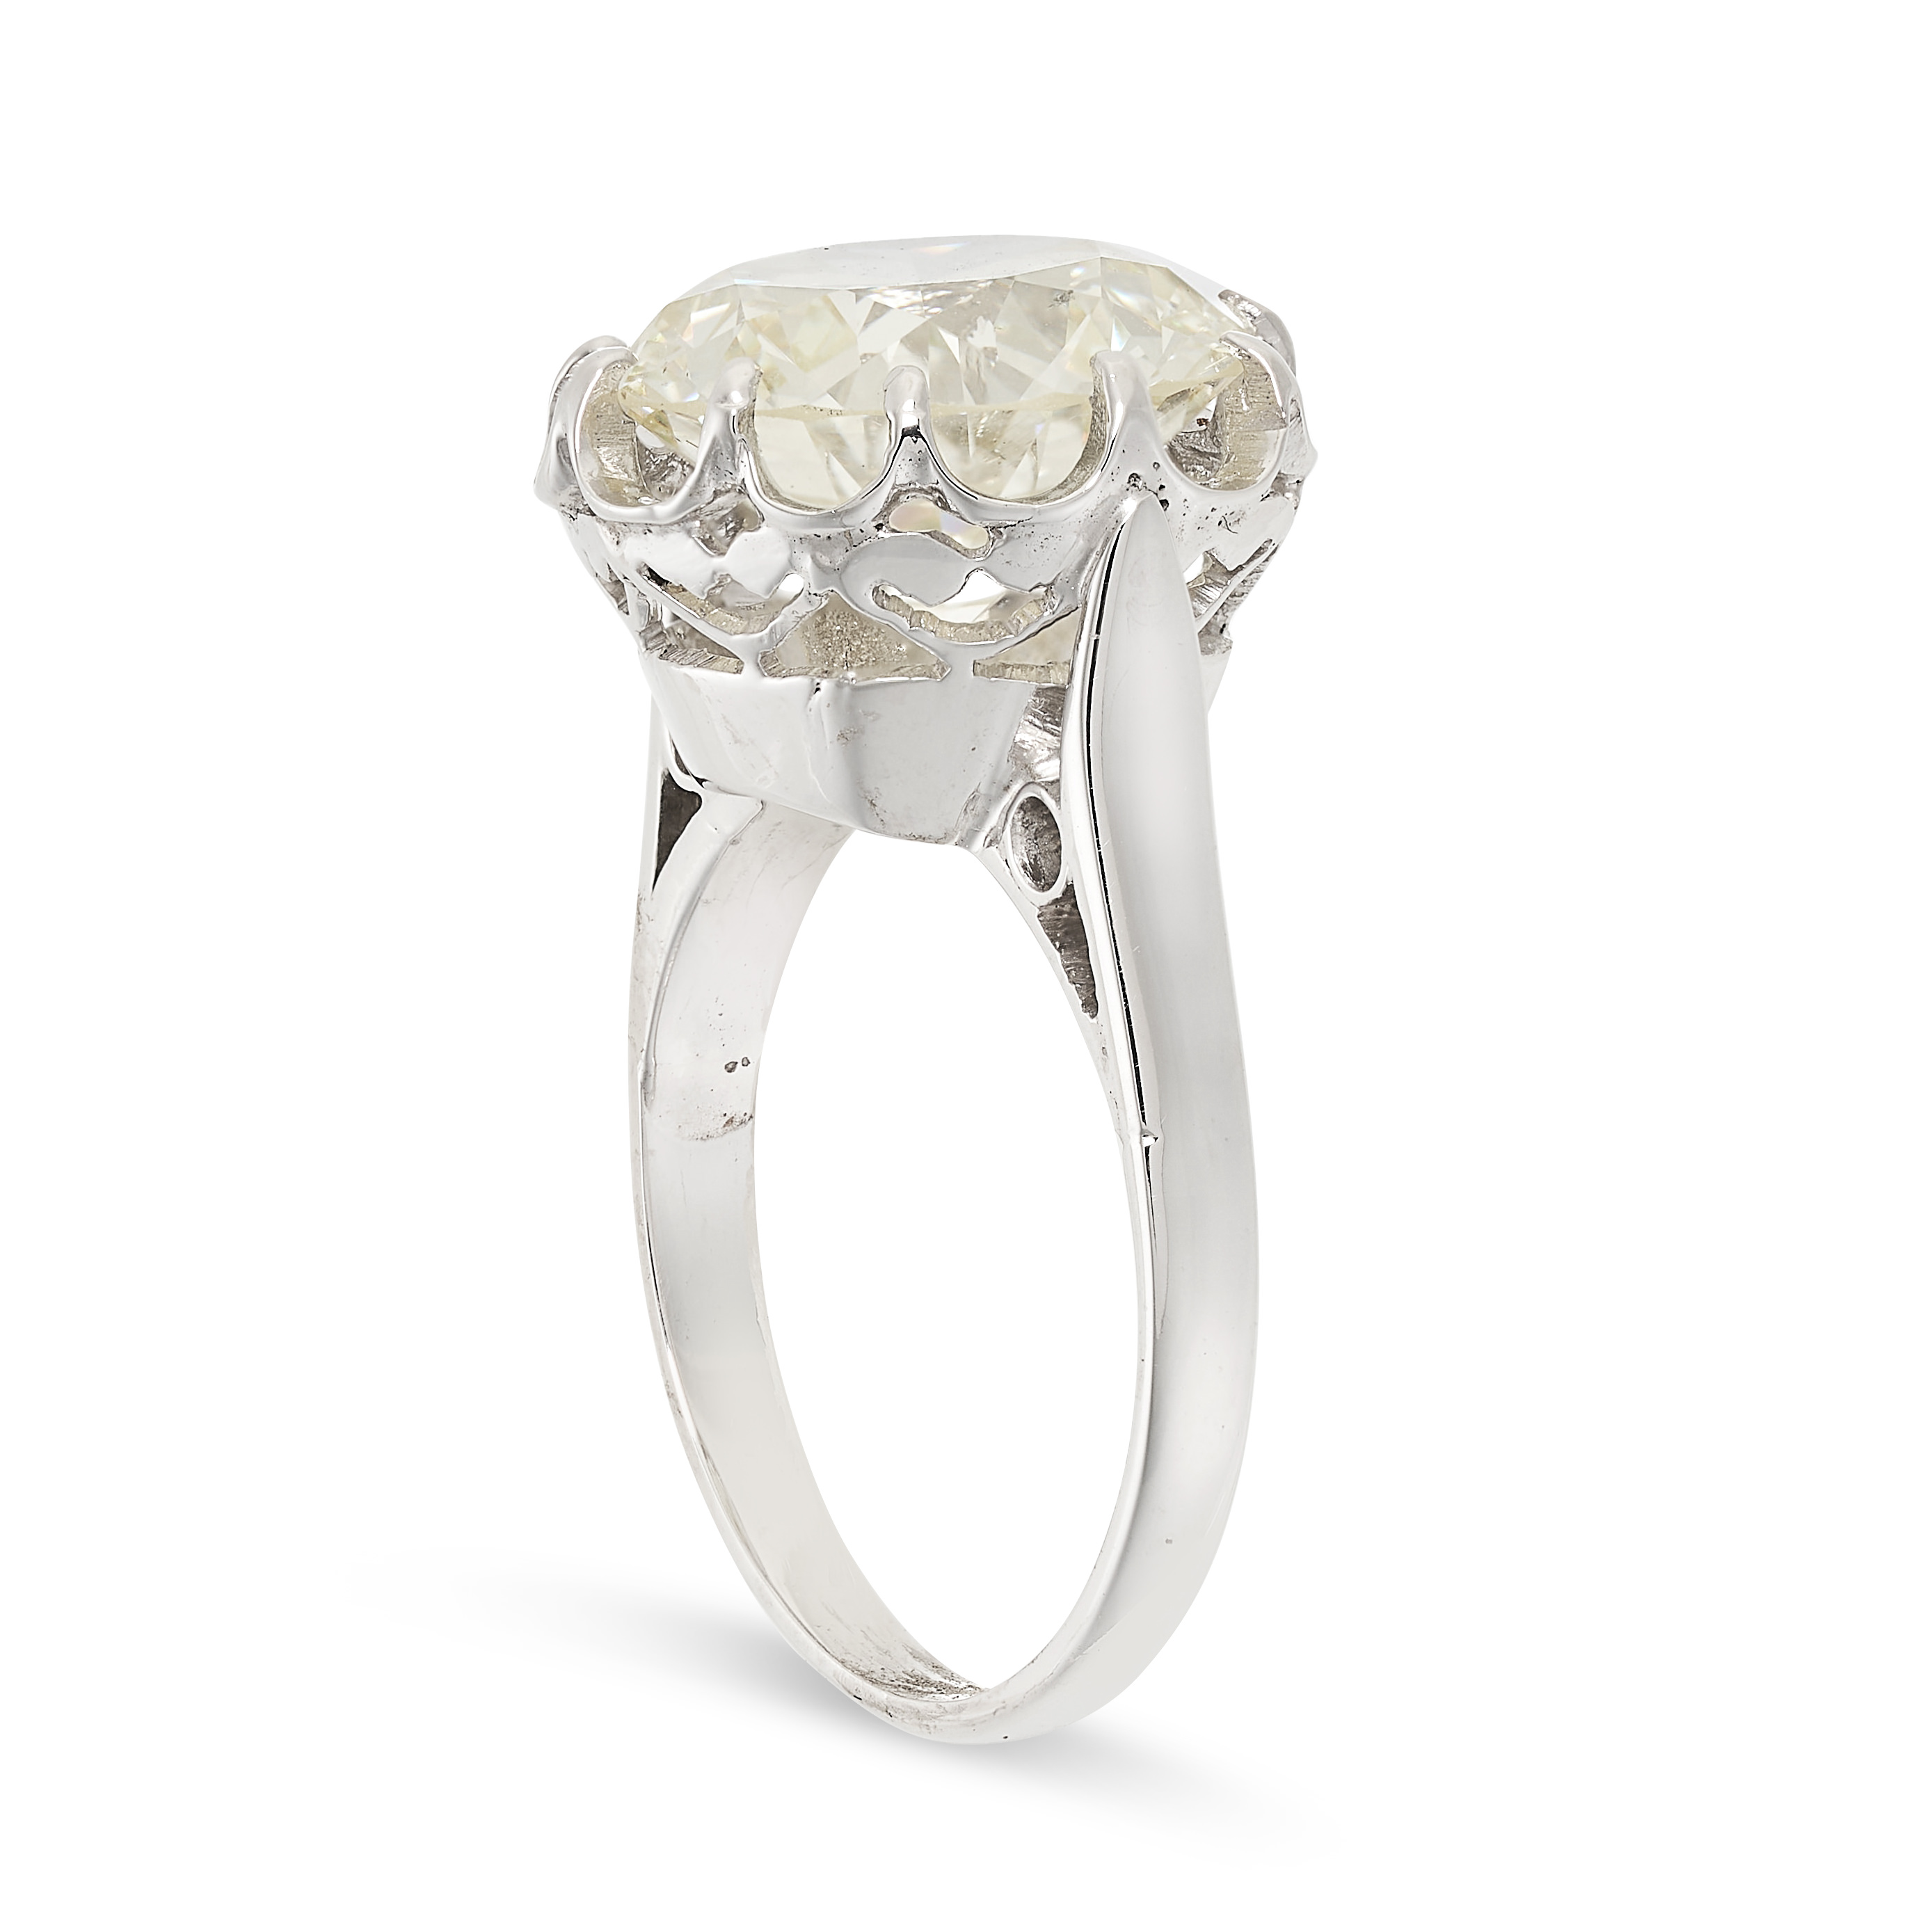 A SOLITAIRE DIAMOND ENGAGEMENT RING set with an old European cut diamond of 5.28 carats, no assay - Image 2 of 2